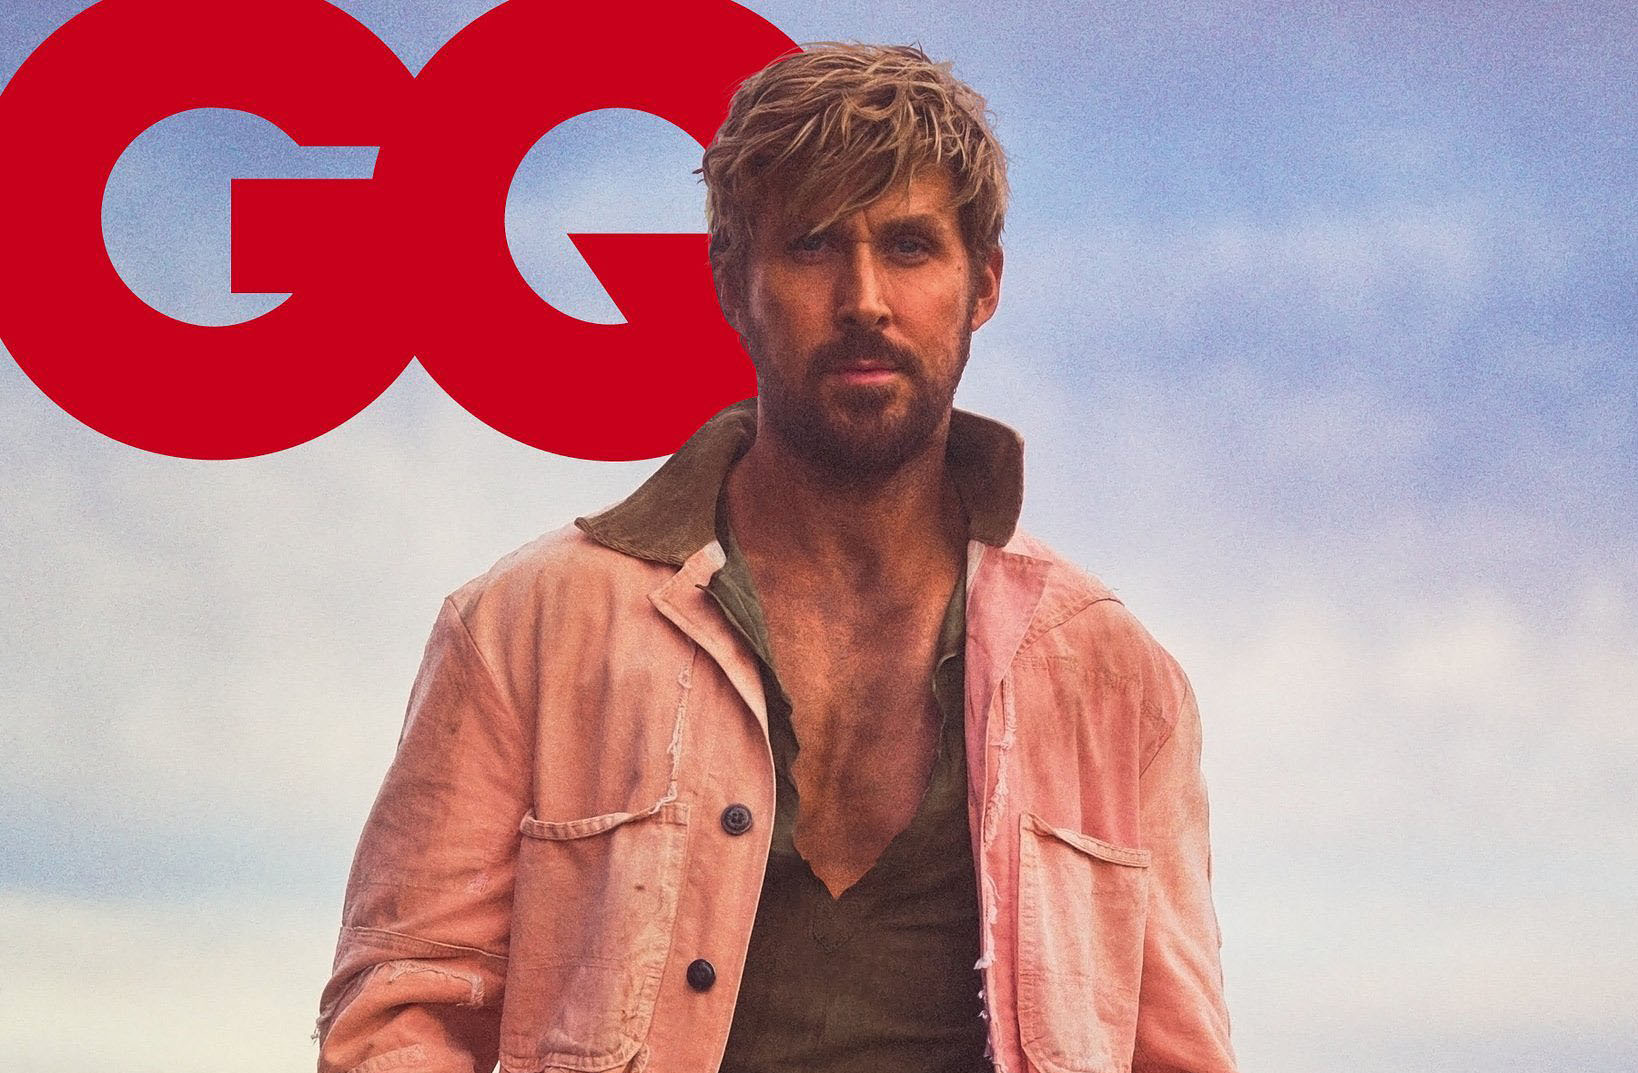 Ryan Gosling opens up about his new role as Ken